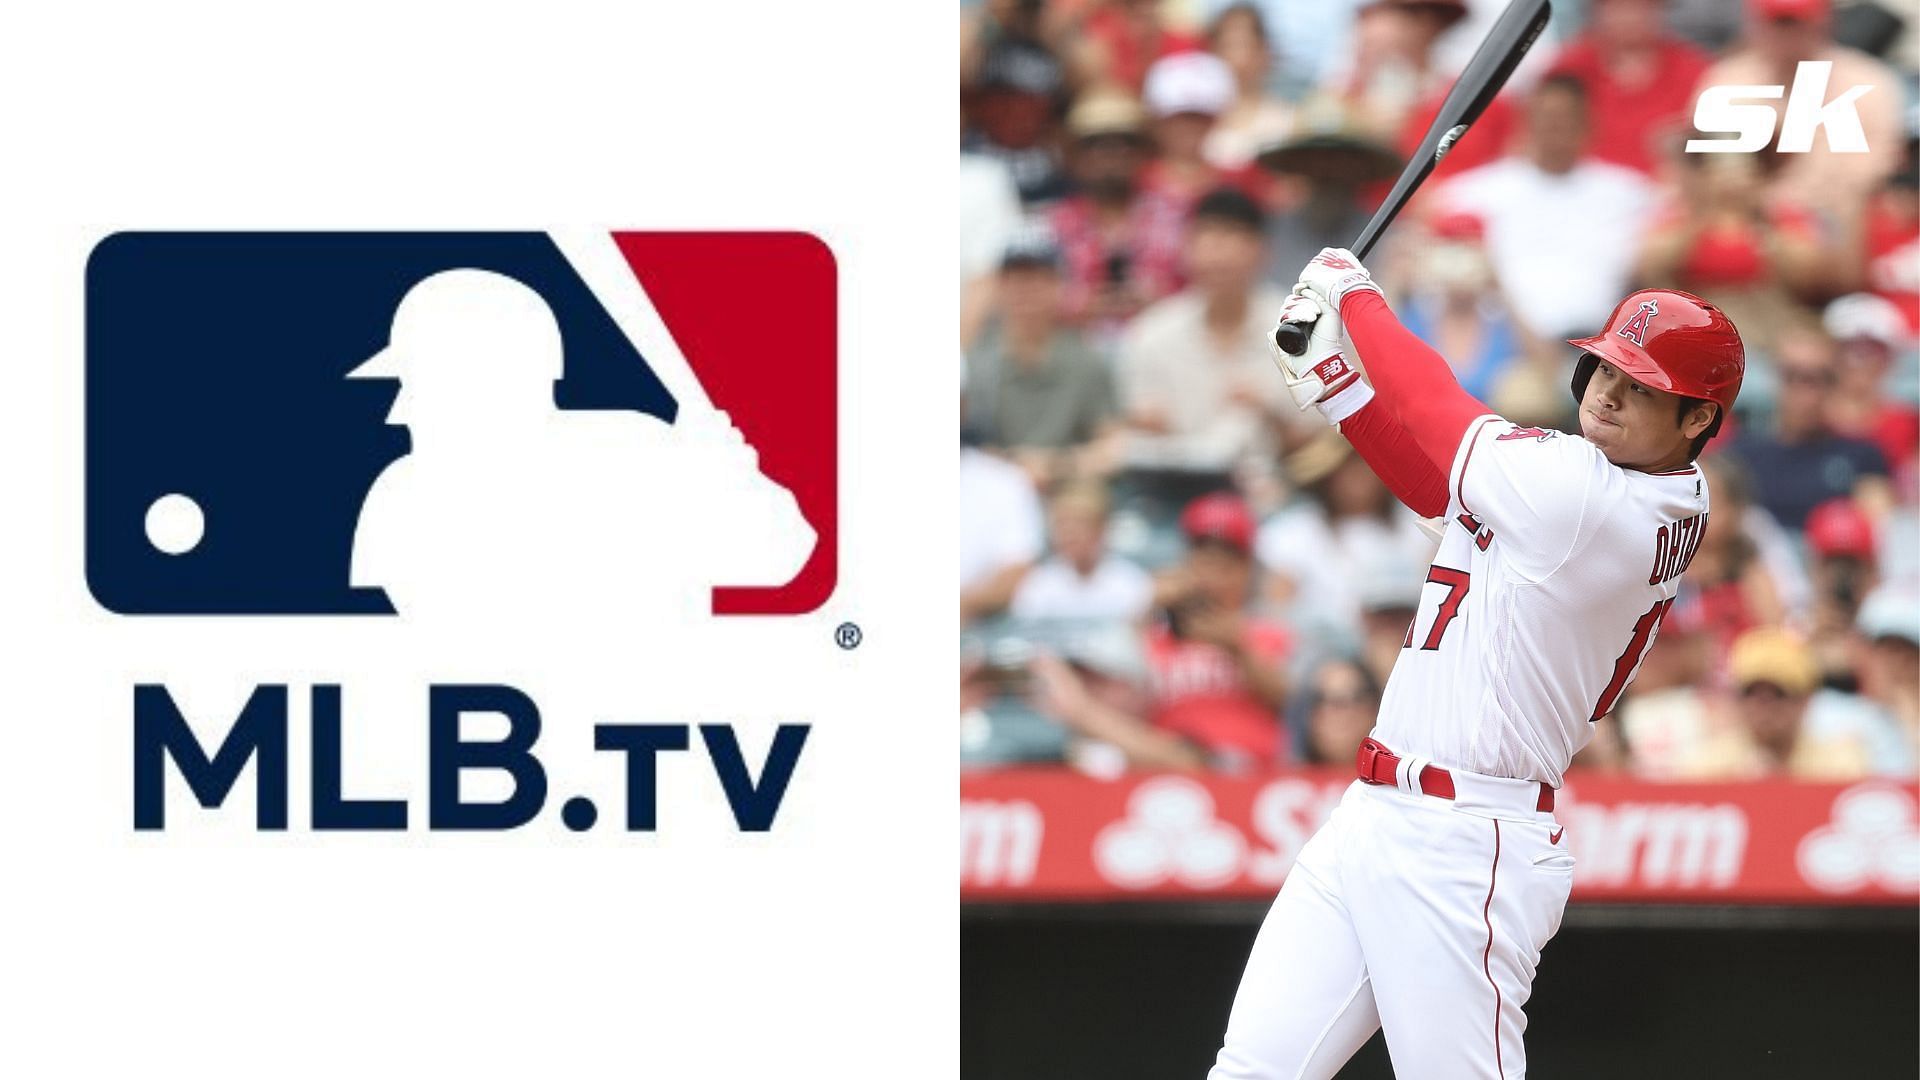 MLB TV College students Can College students watch MLB TV for free? Examining details and requirements of special offer